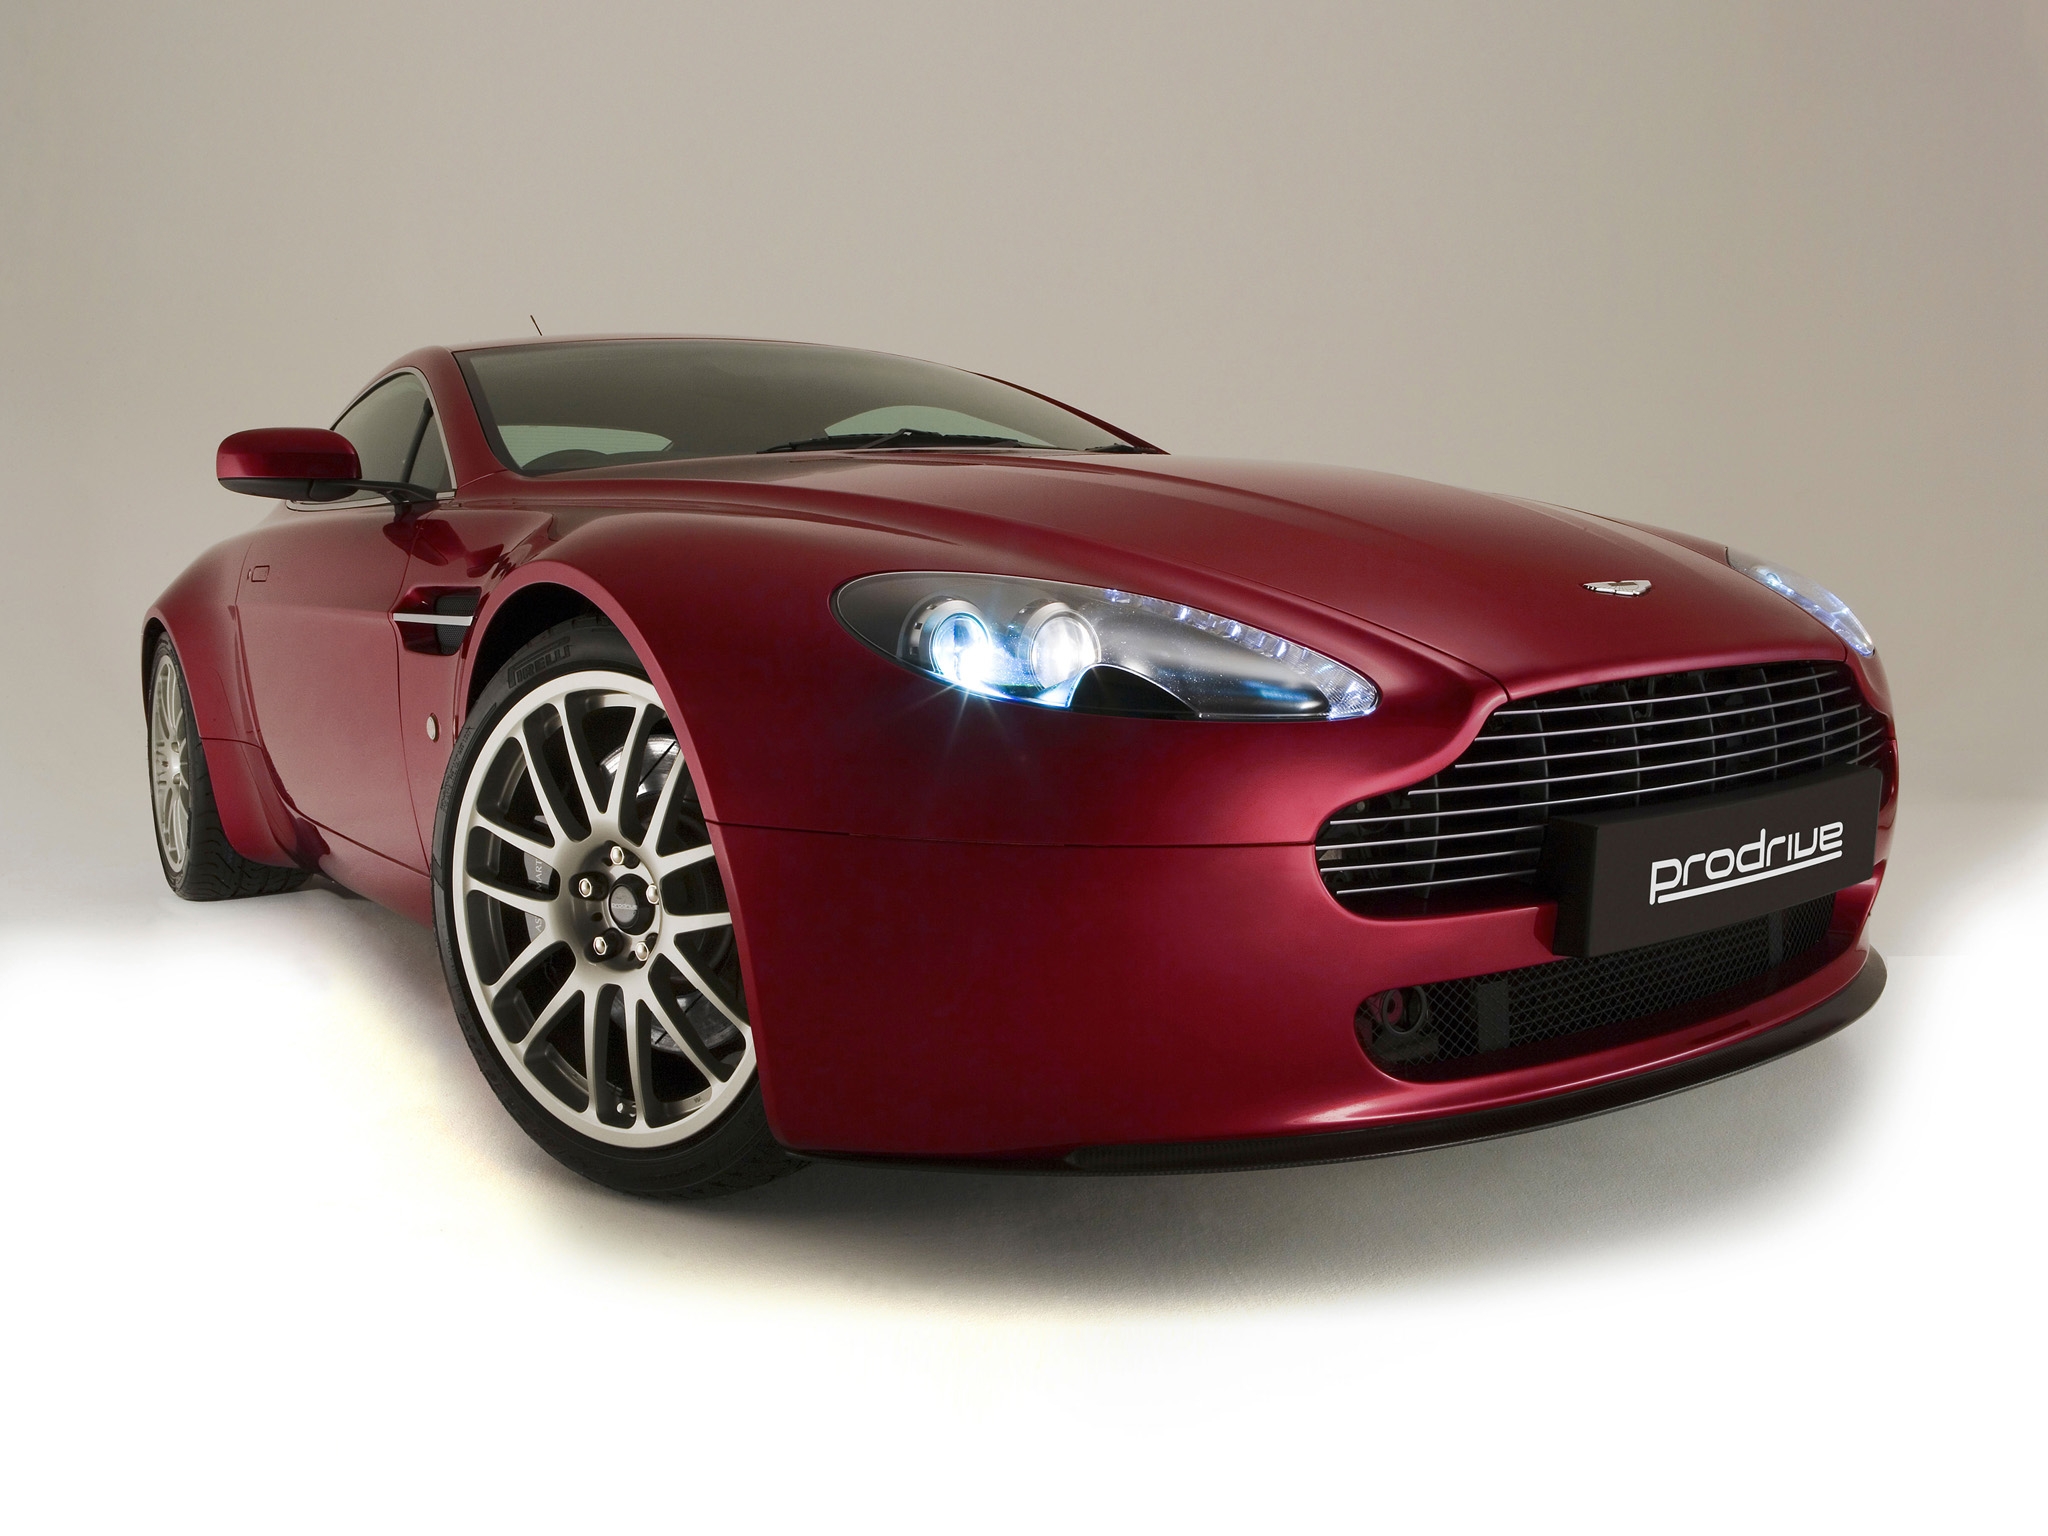 Windows Backgrounds aston martin, front view, cherry, cars, style, 2007, v8, vantage